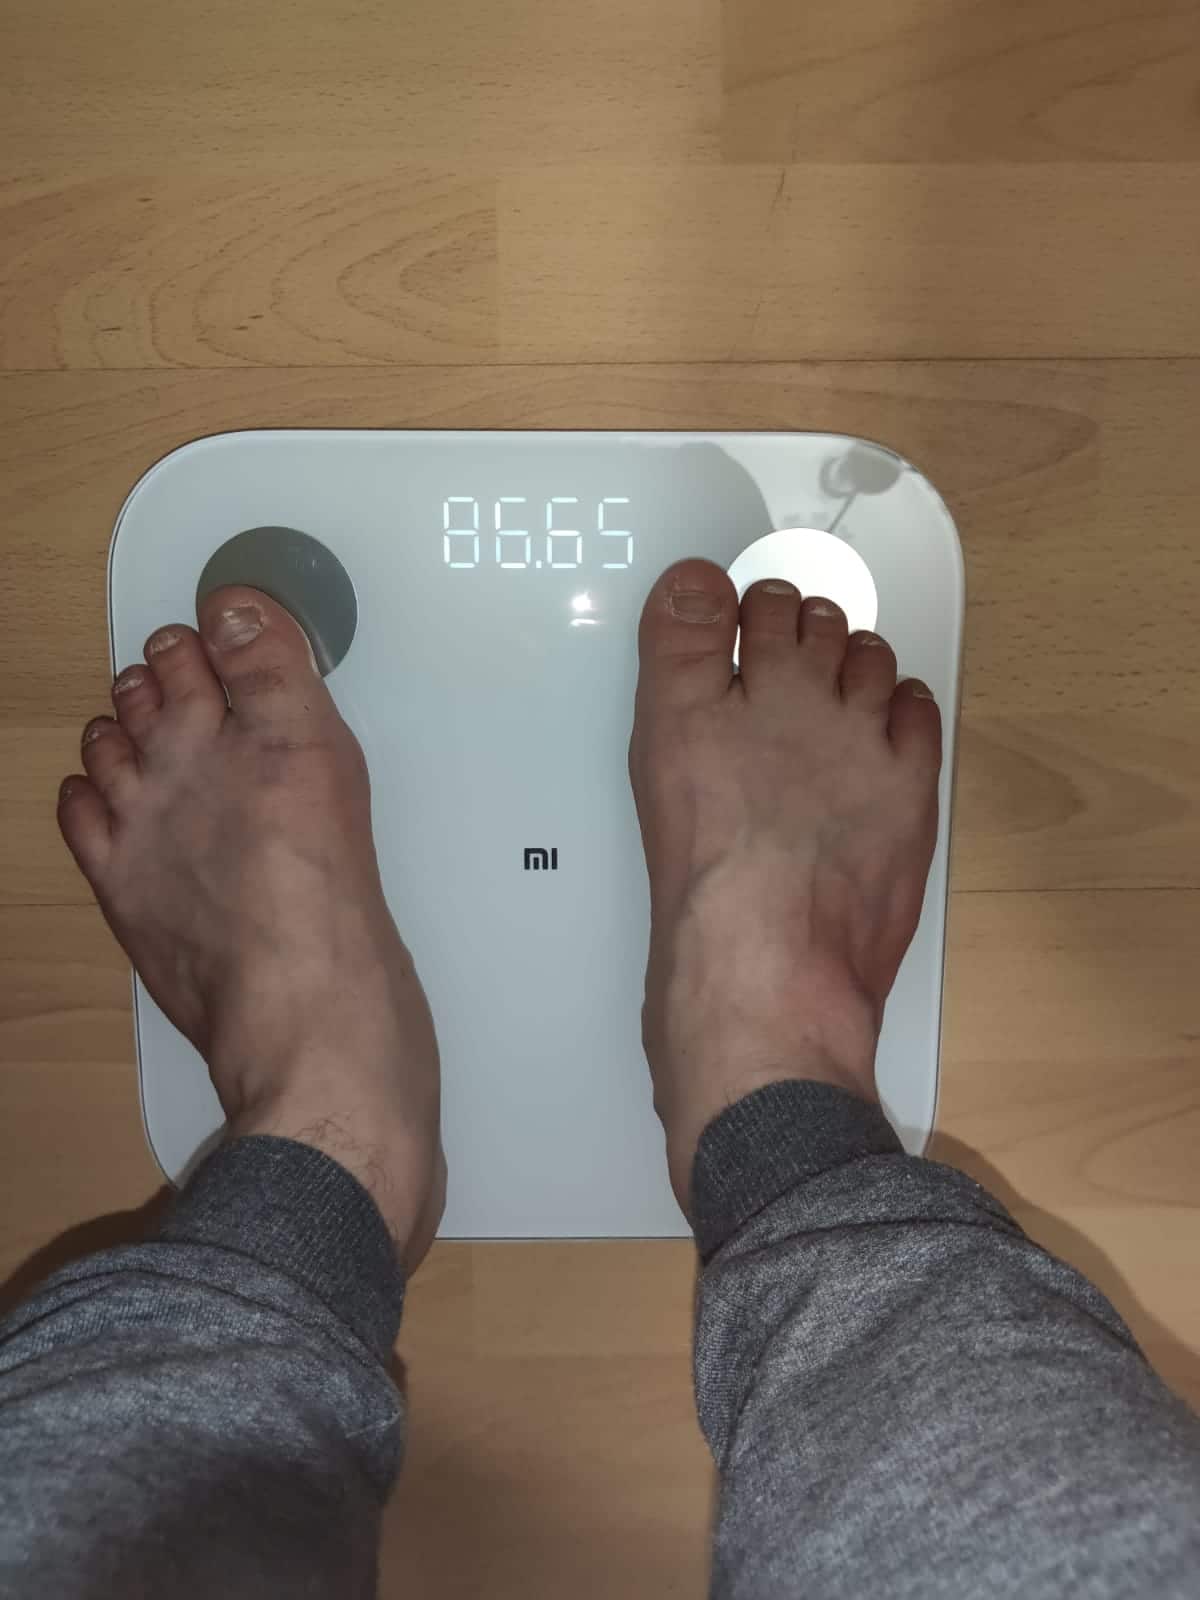 Mi Body Composition Scale 2 Review: Look Beyond the Numbers with